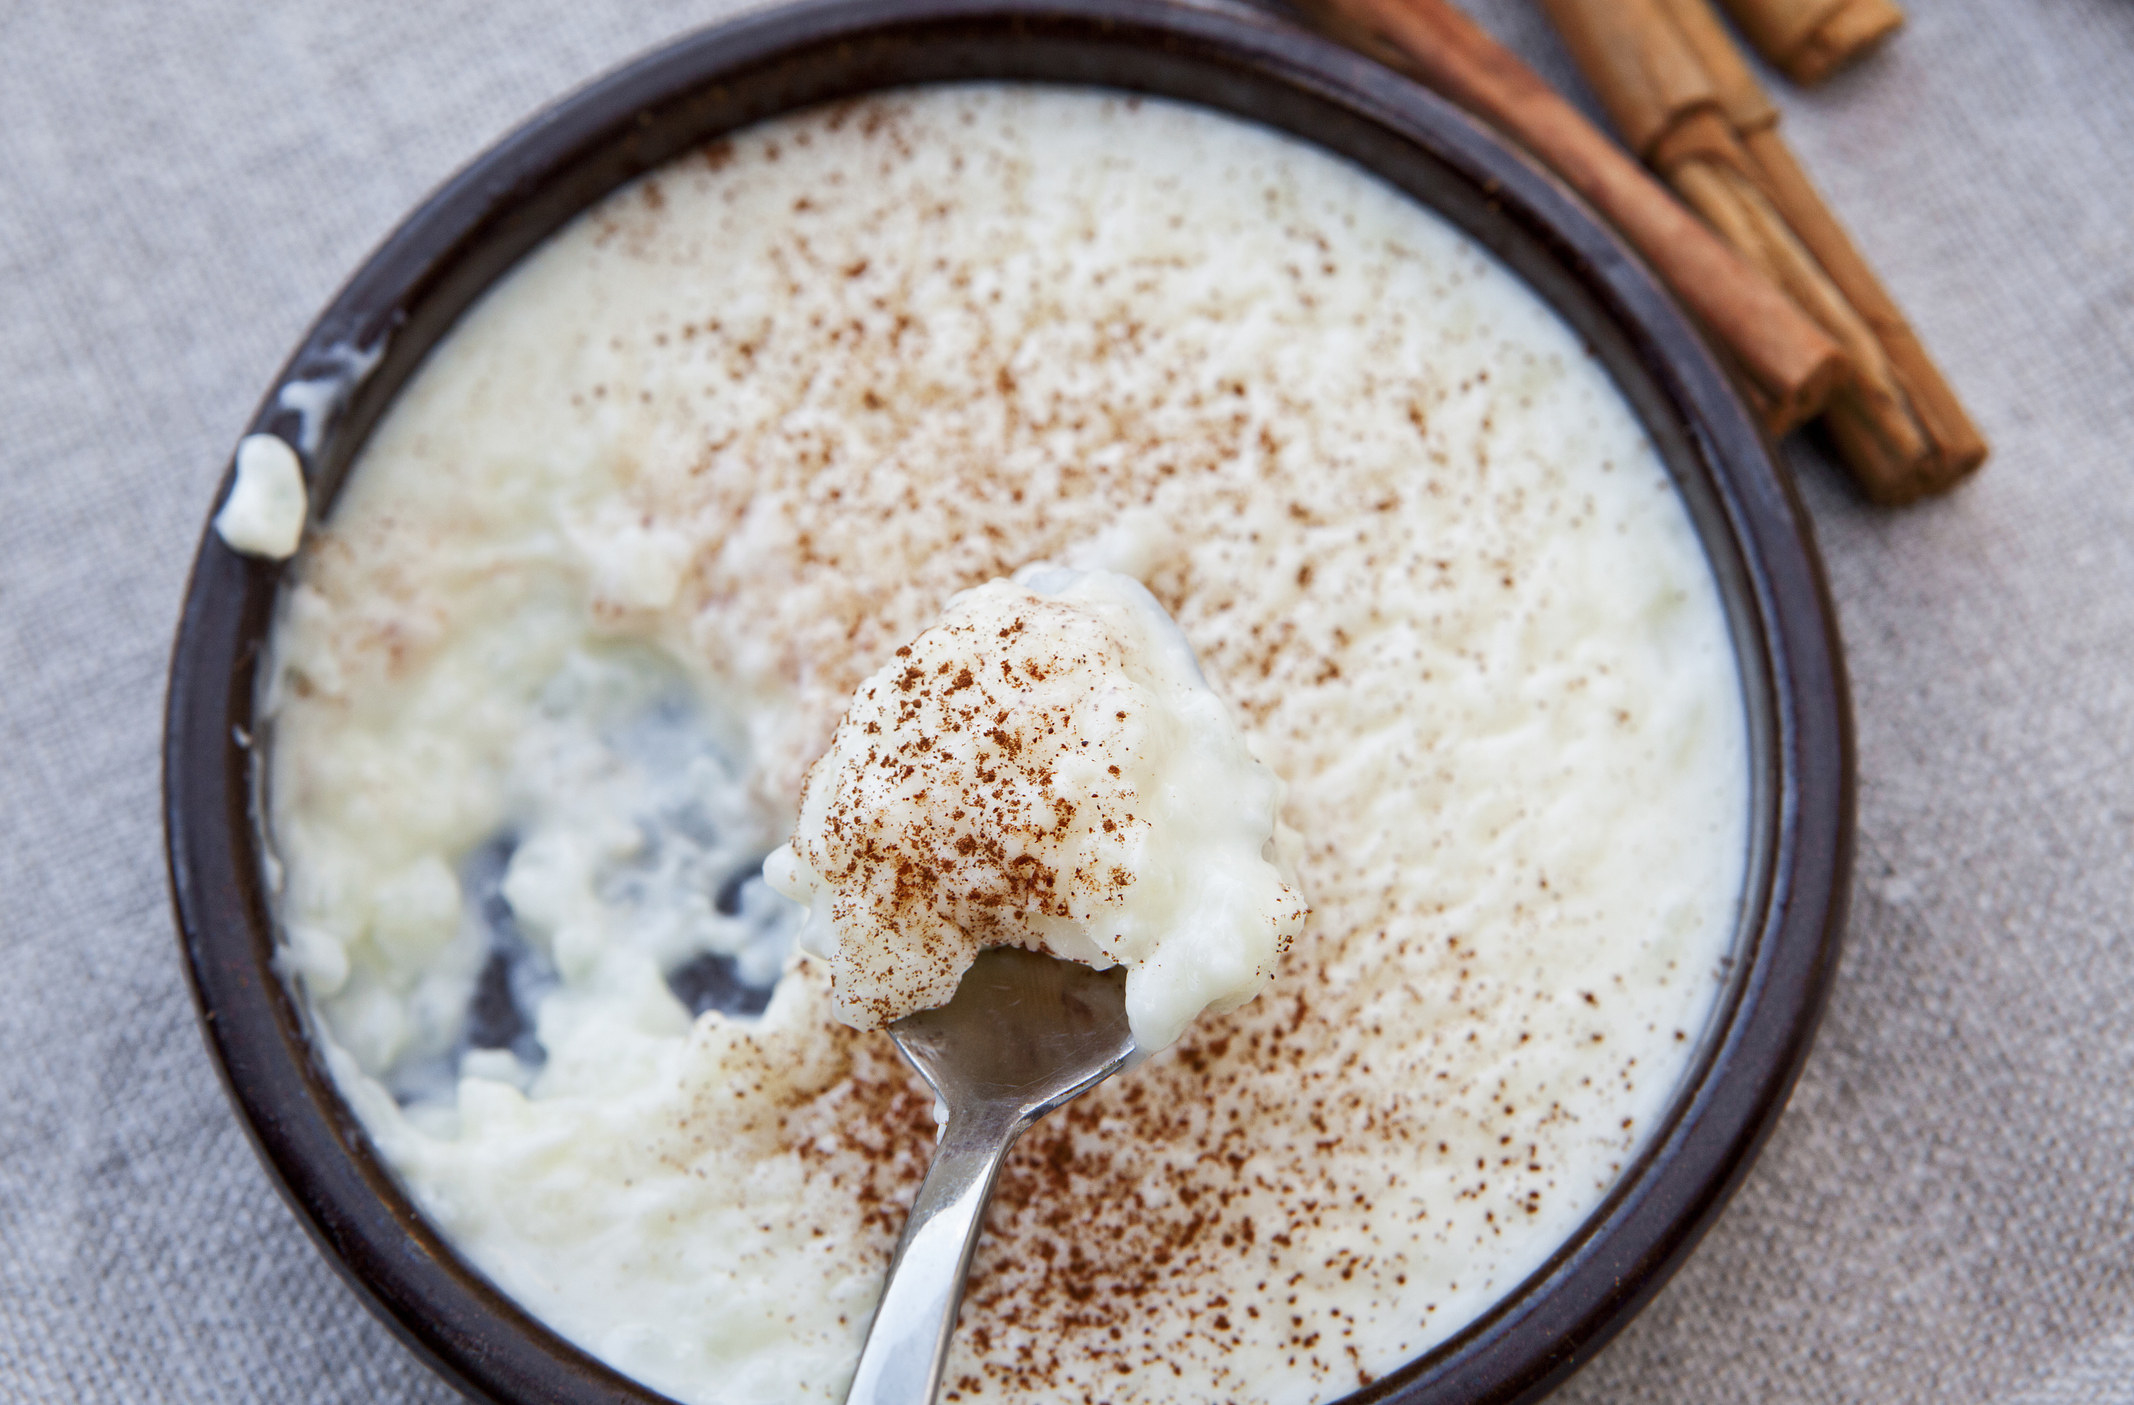 A bowl of rice pudding with cinnamon